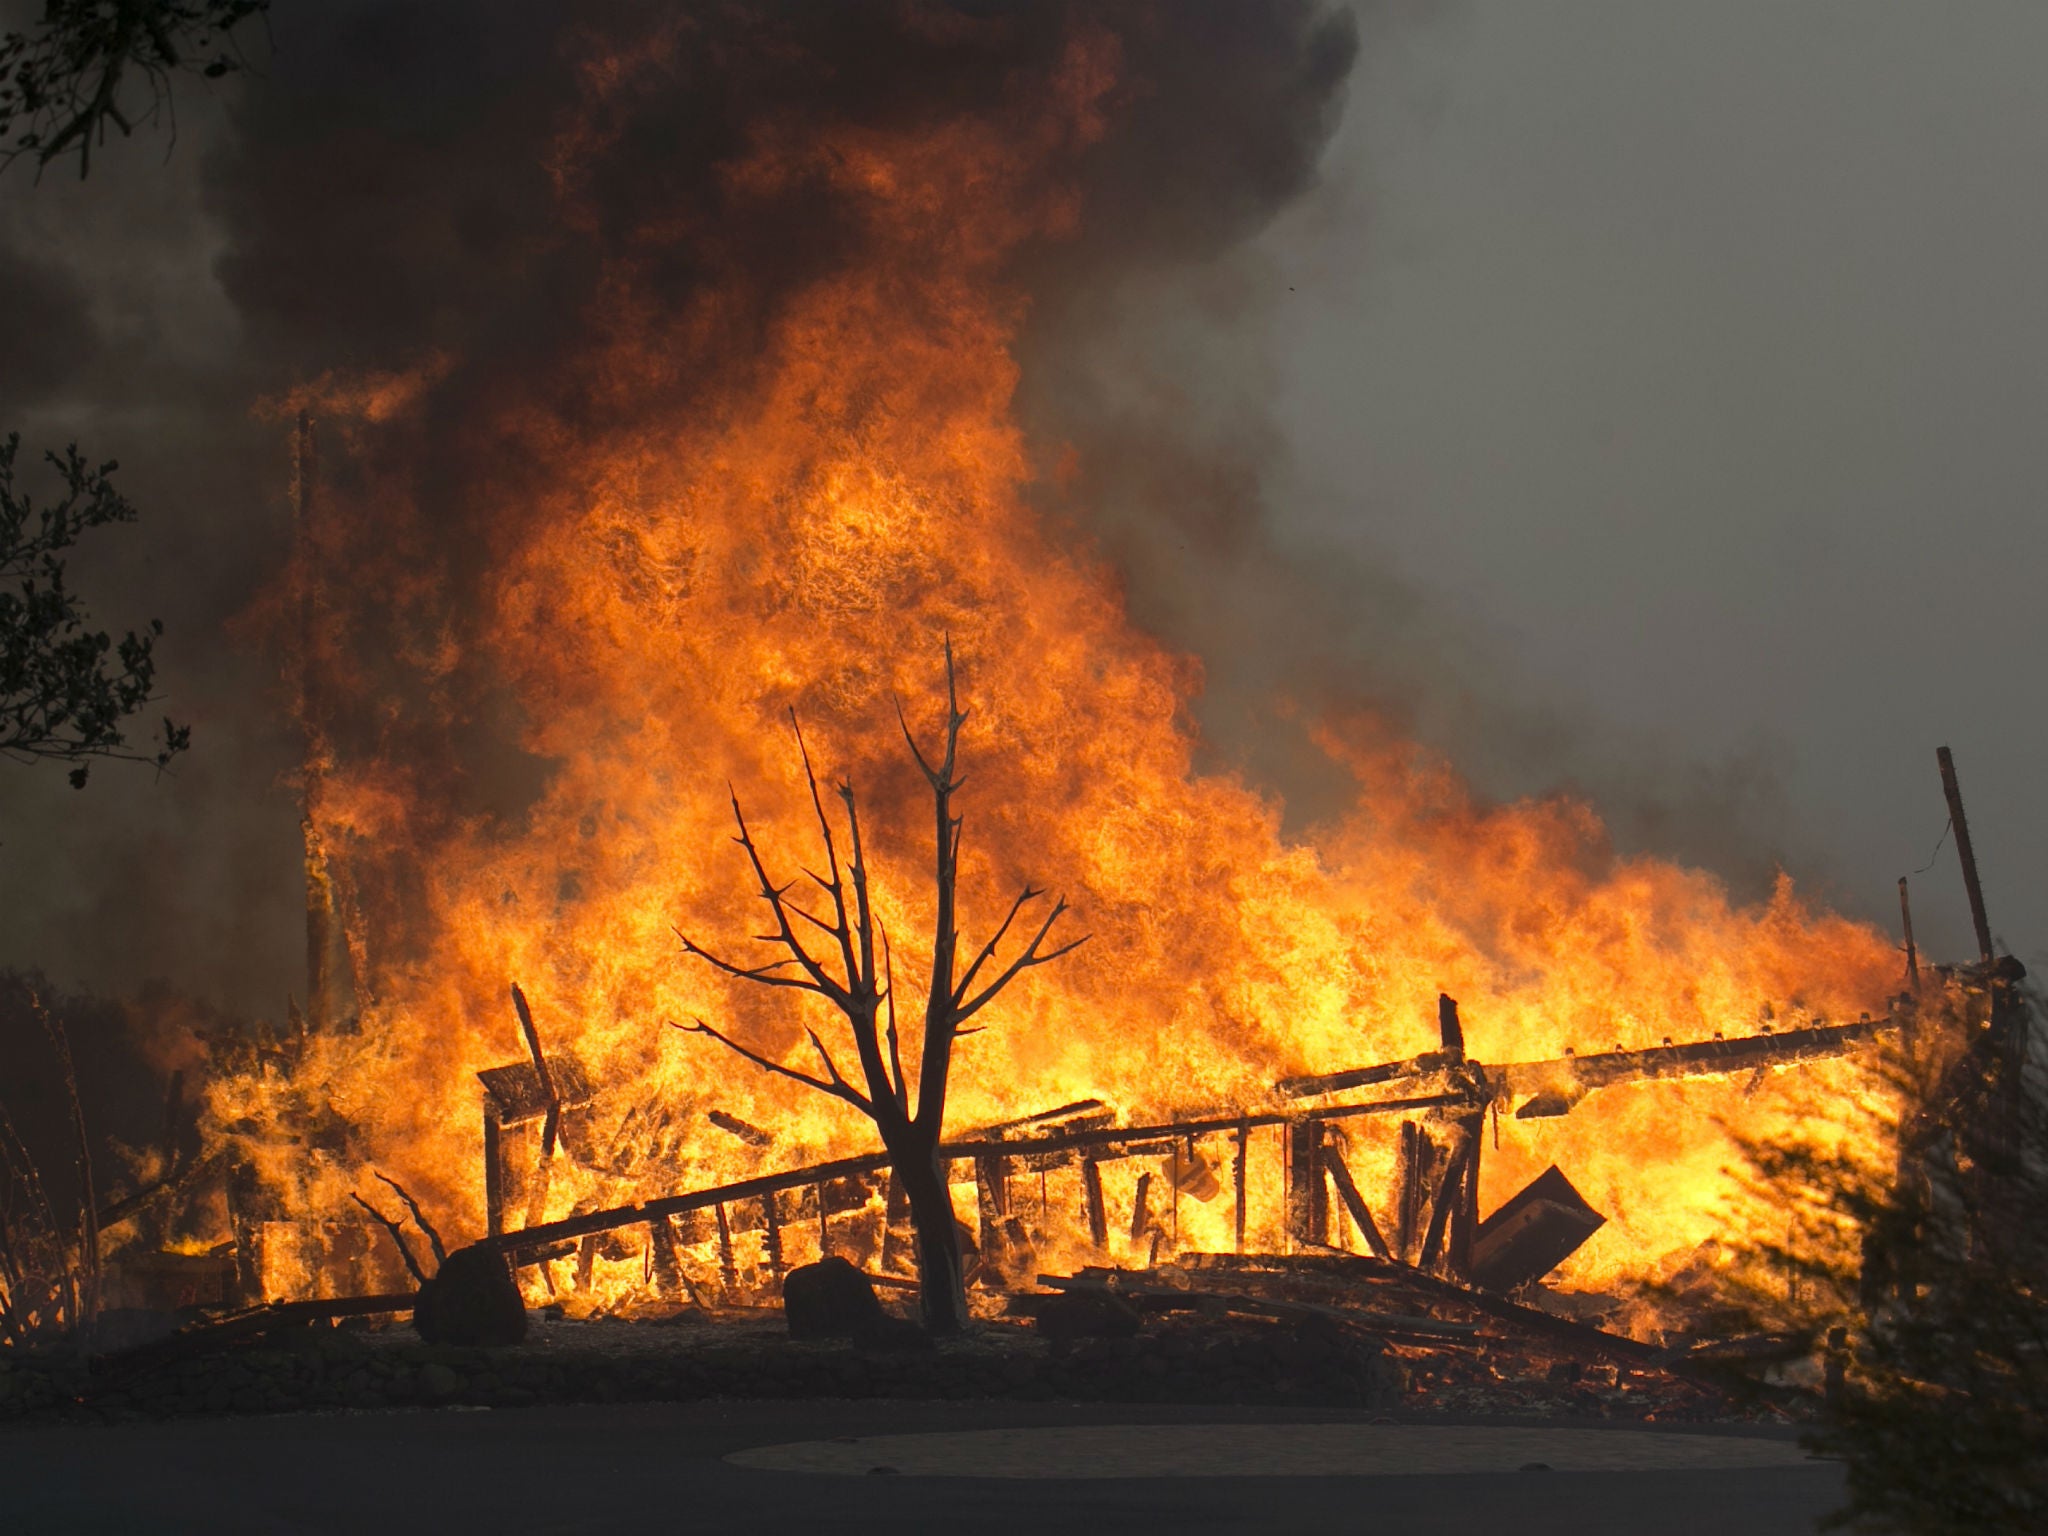 Flames from a wildfire consume a home Monday, Oct. 9, 2017, east of Napa, Calif